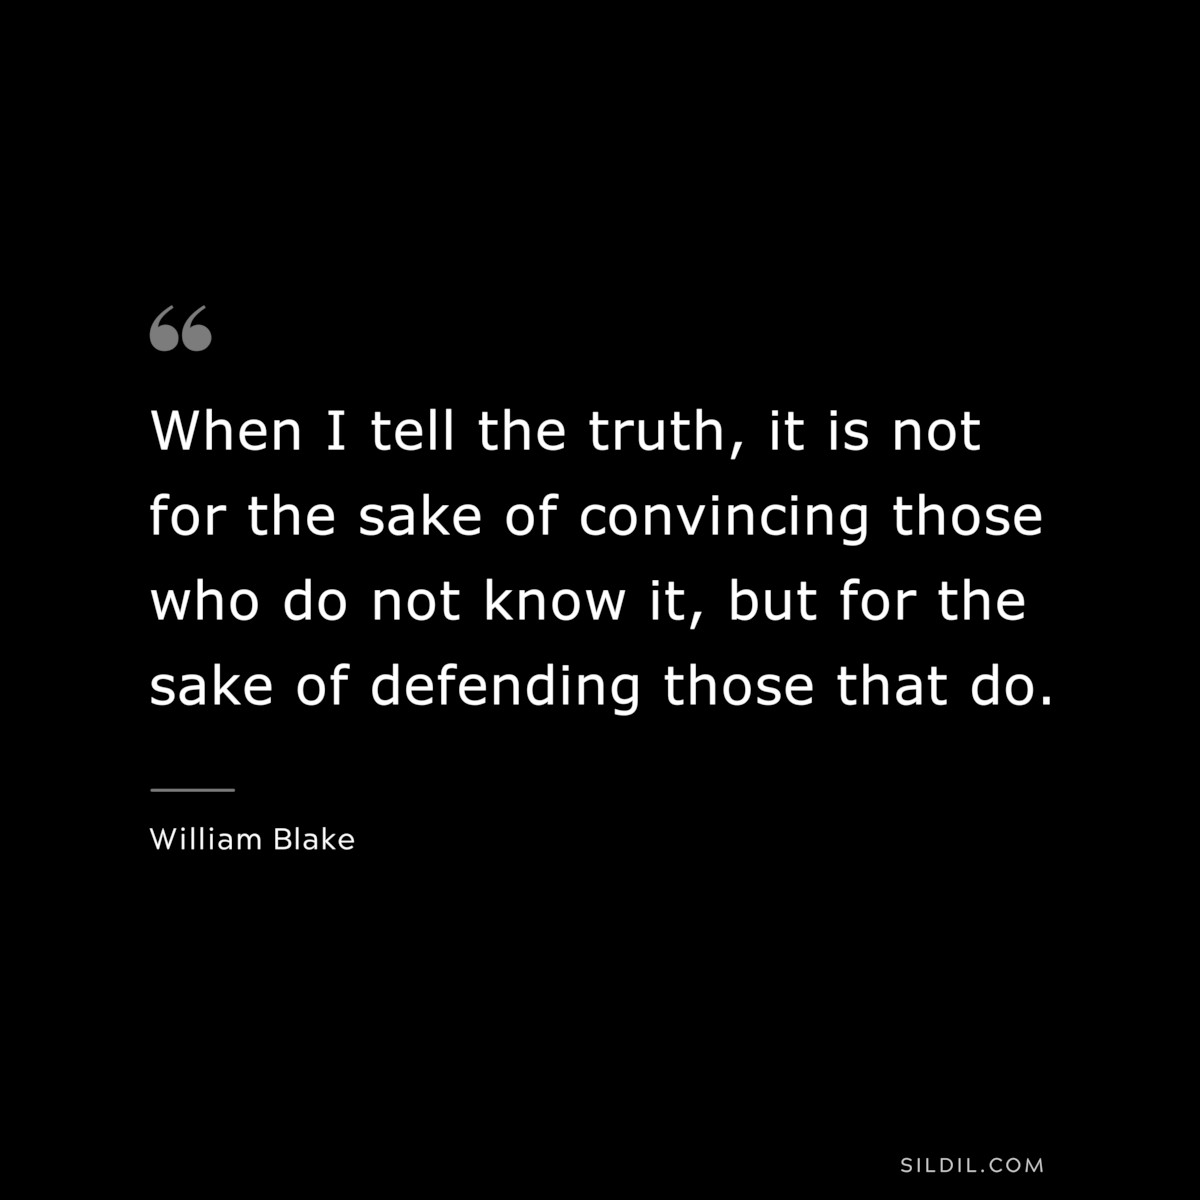 When I tell the truth, it is not for the sake of convincing those who do not know it, but for the sake of defending those that do. ― William Blake